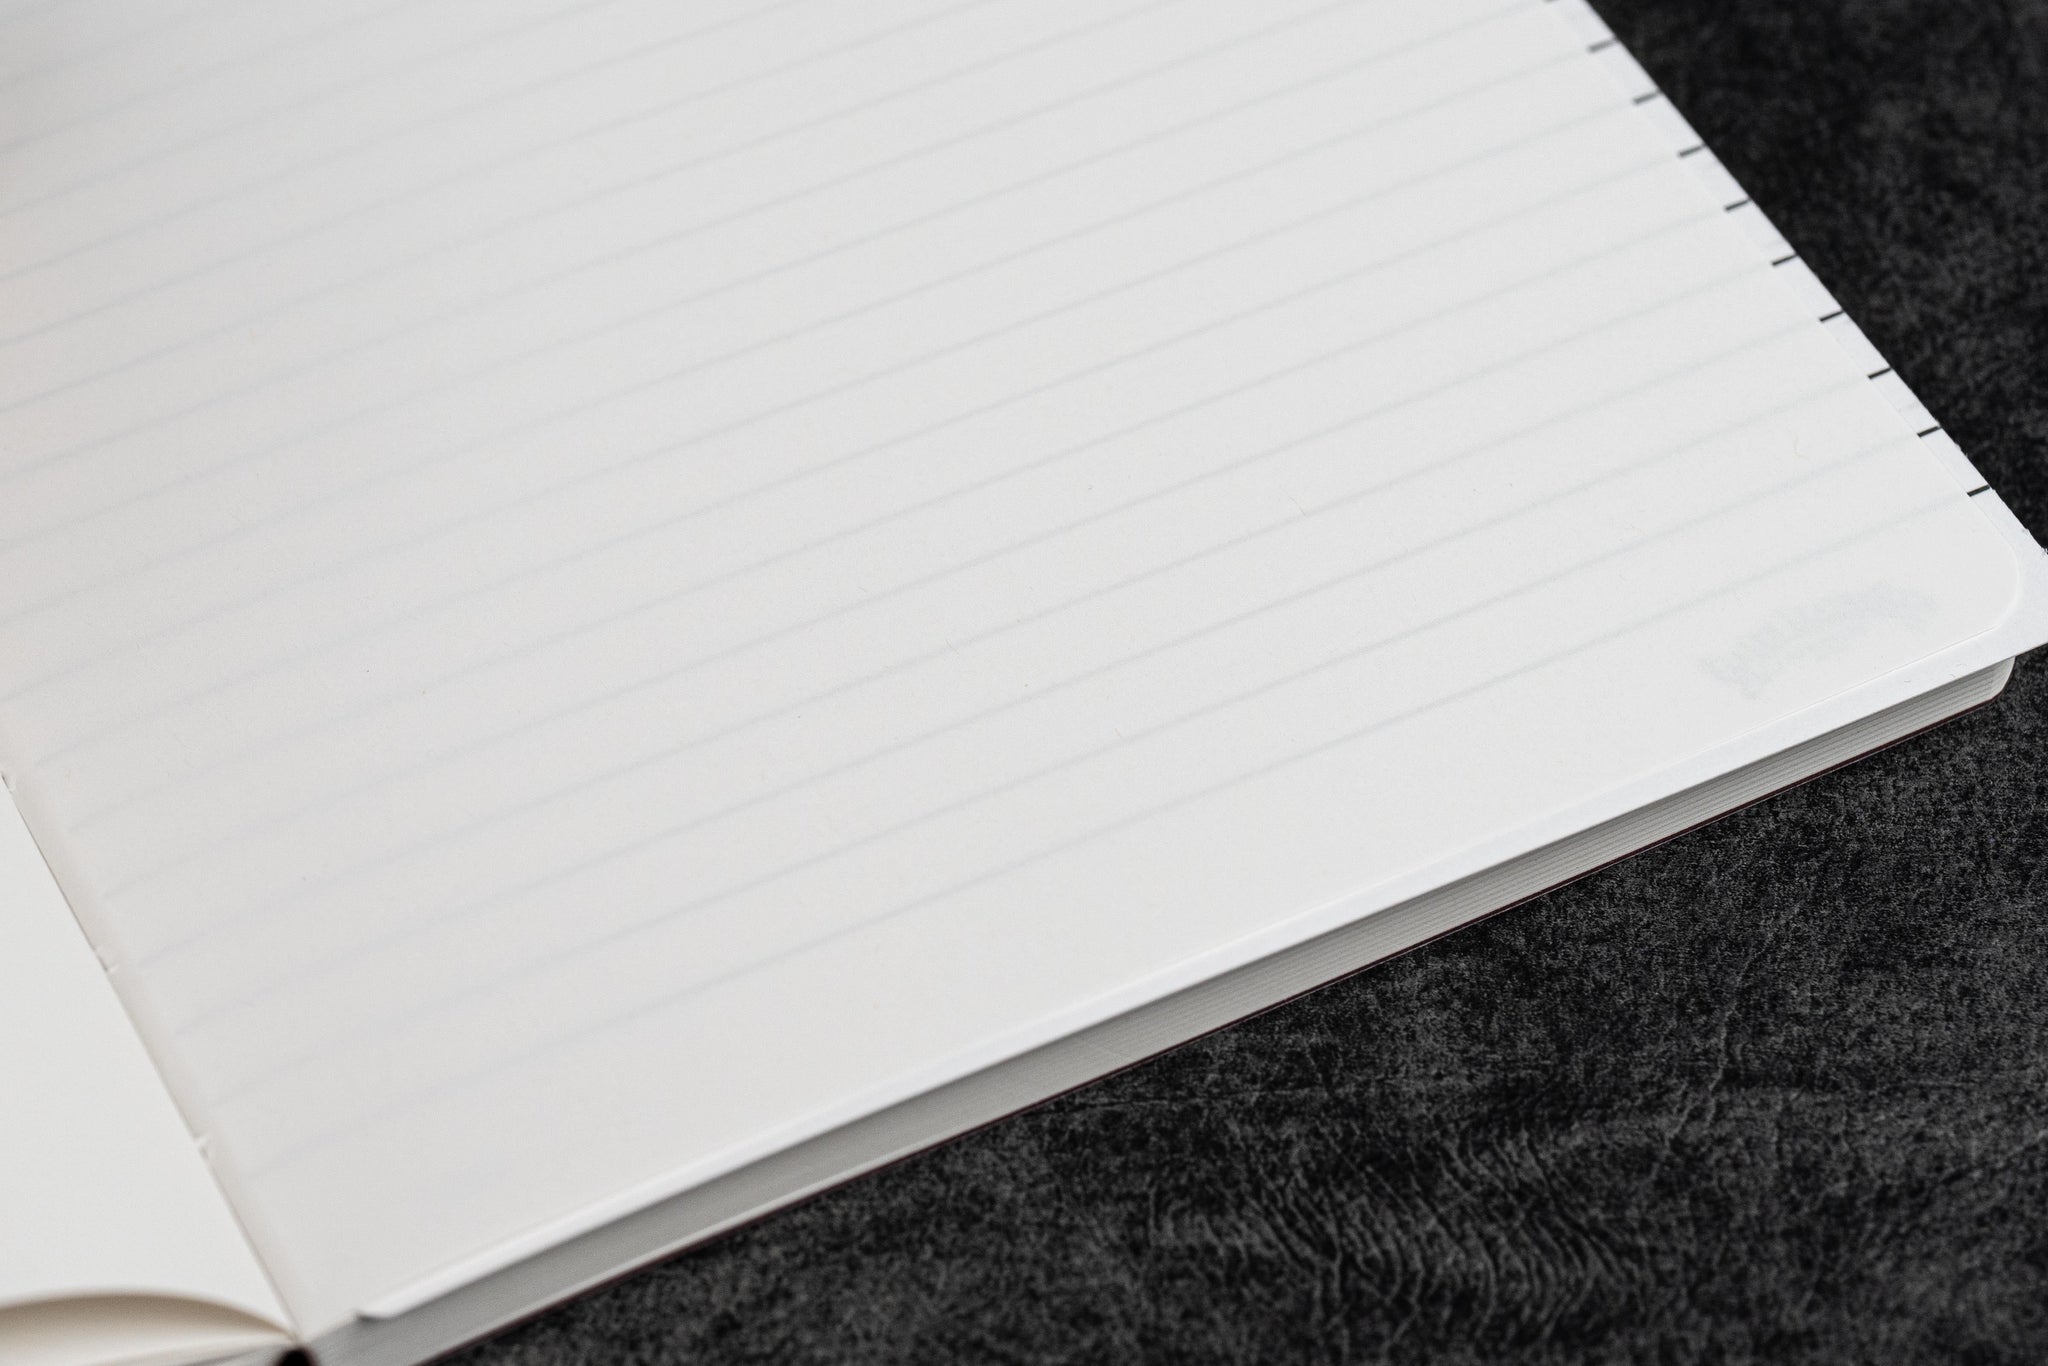 Bring the coveted Japanese paper to your desk with these minimal